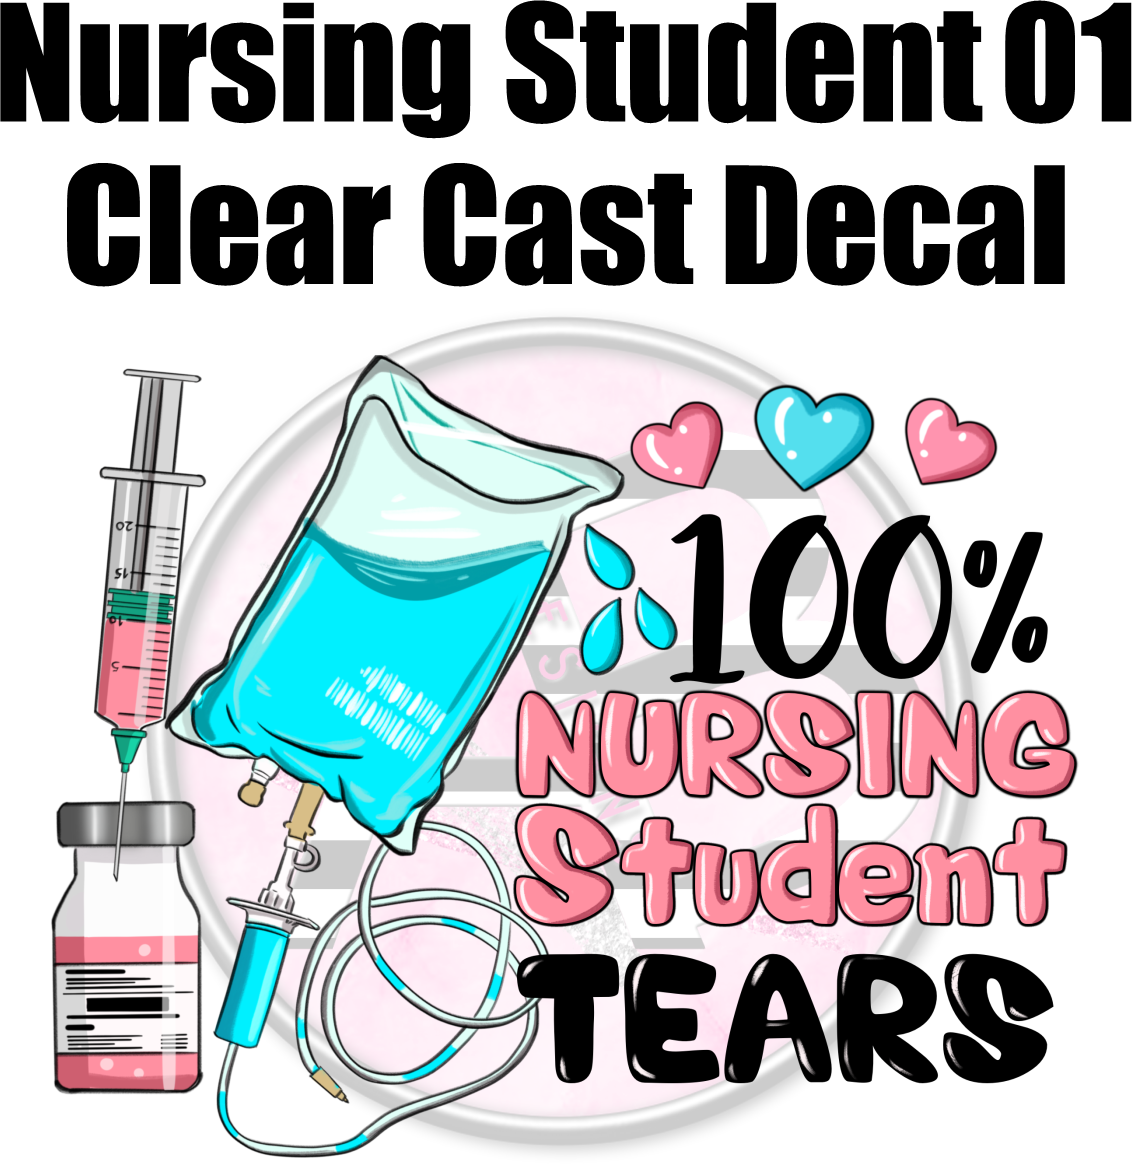 Nursing Student 01 - Clear Cast Decal